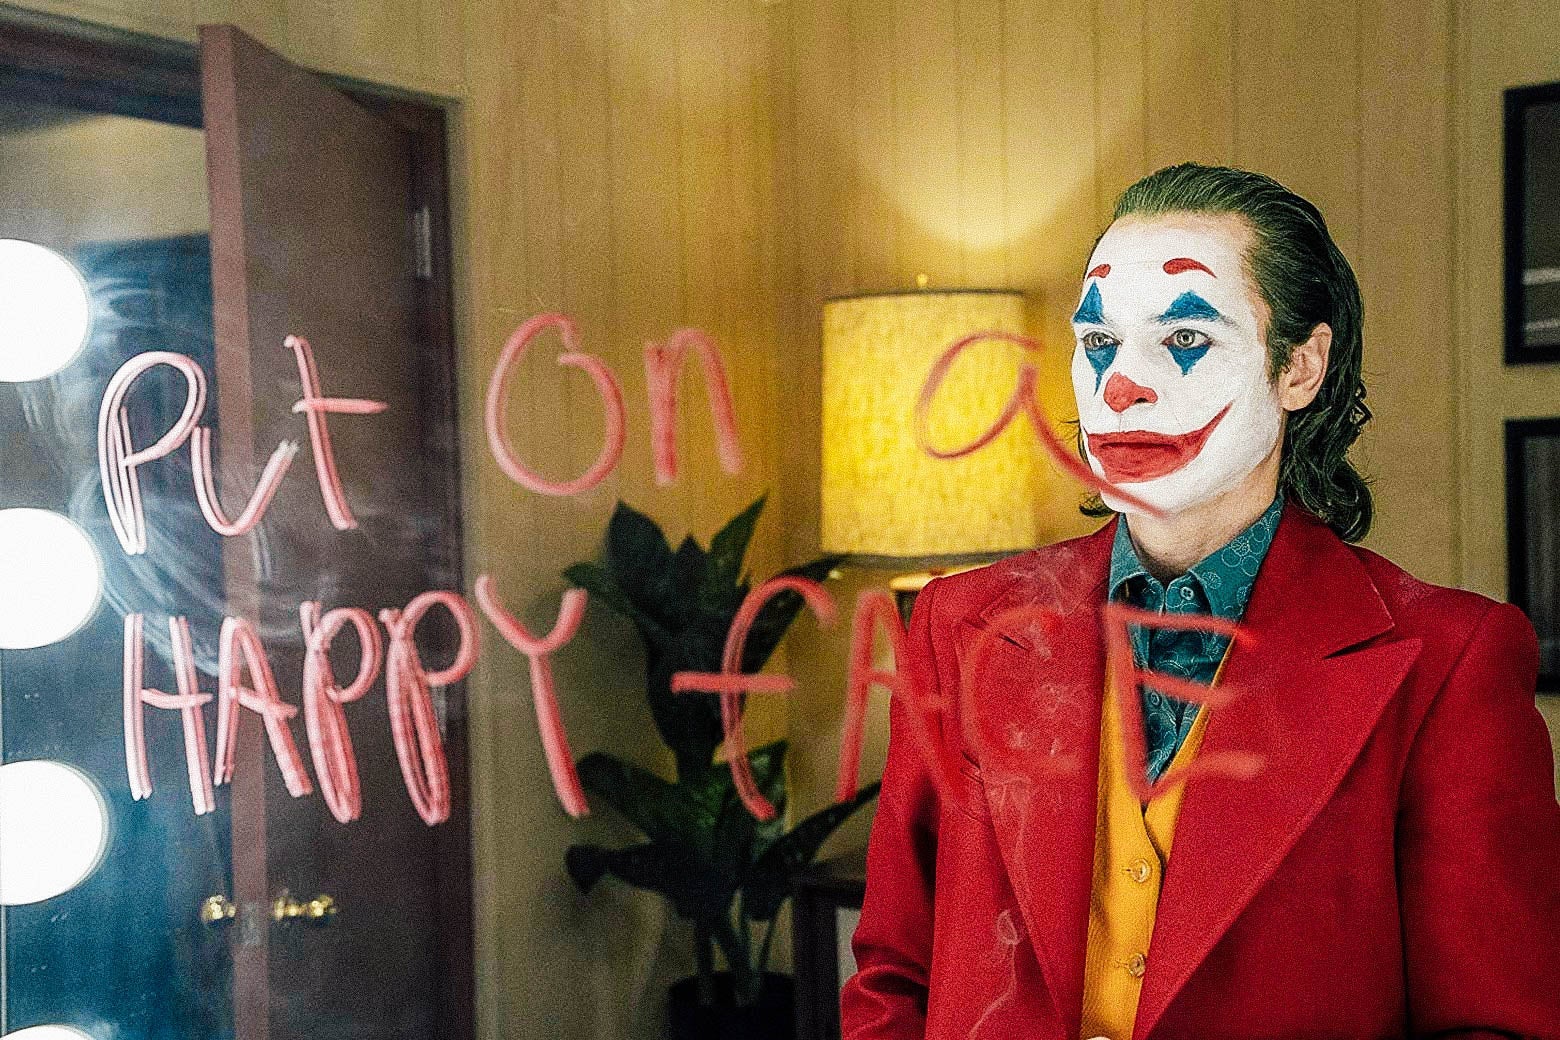 In this still of Joaquin Phoenix in Joker, Phoenix is clad in clown makeup and looking at a green room mirror with the words "Put on a happy face" written on it in marker or makeup.